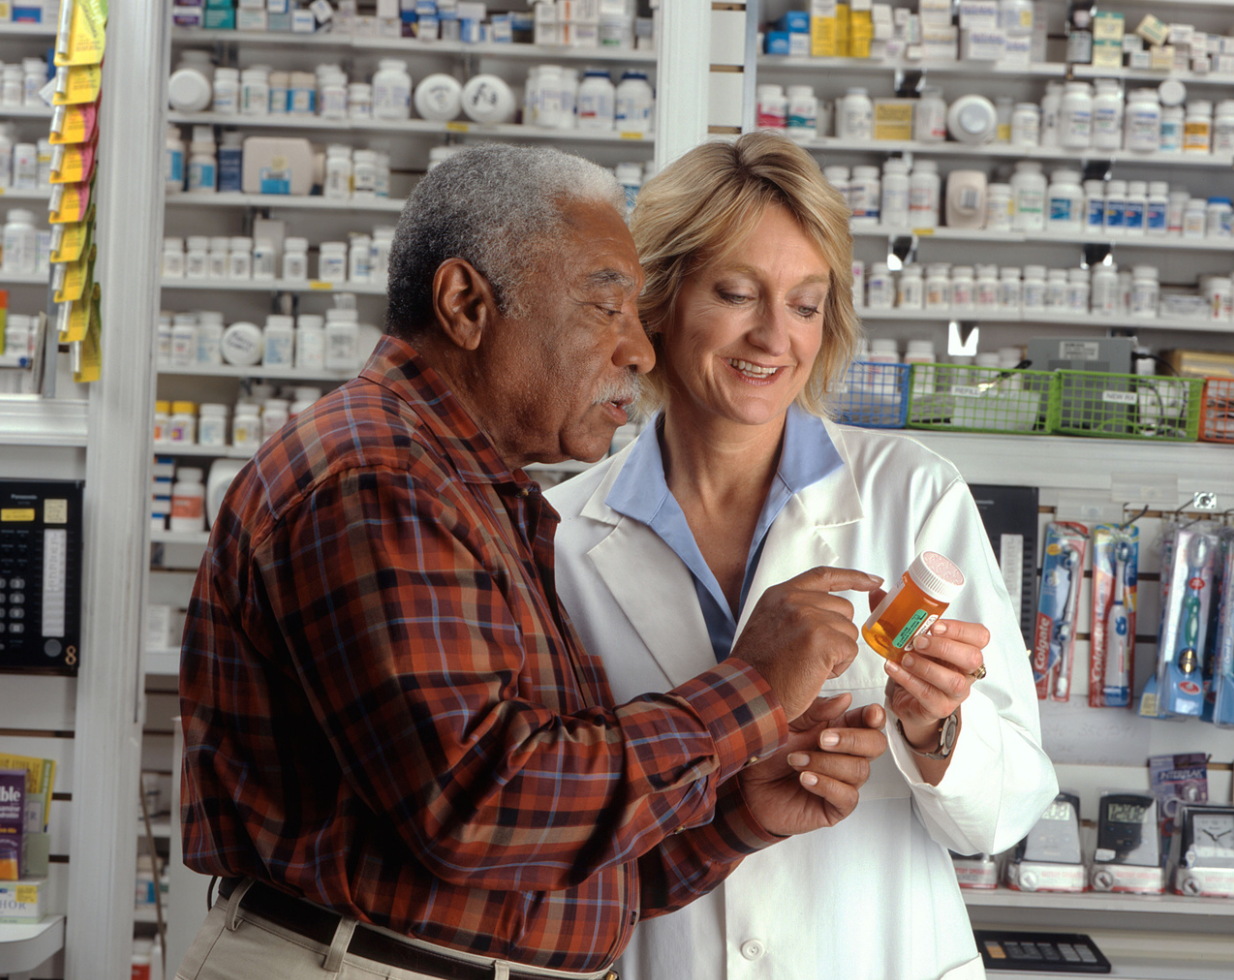 Pharmacists Need to Step Up Their Communications Game